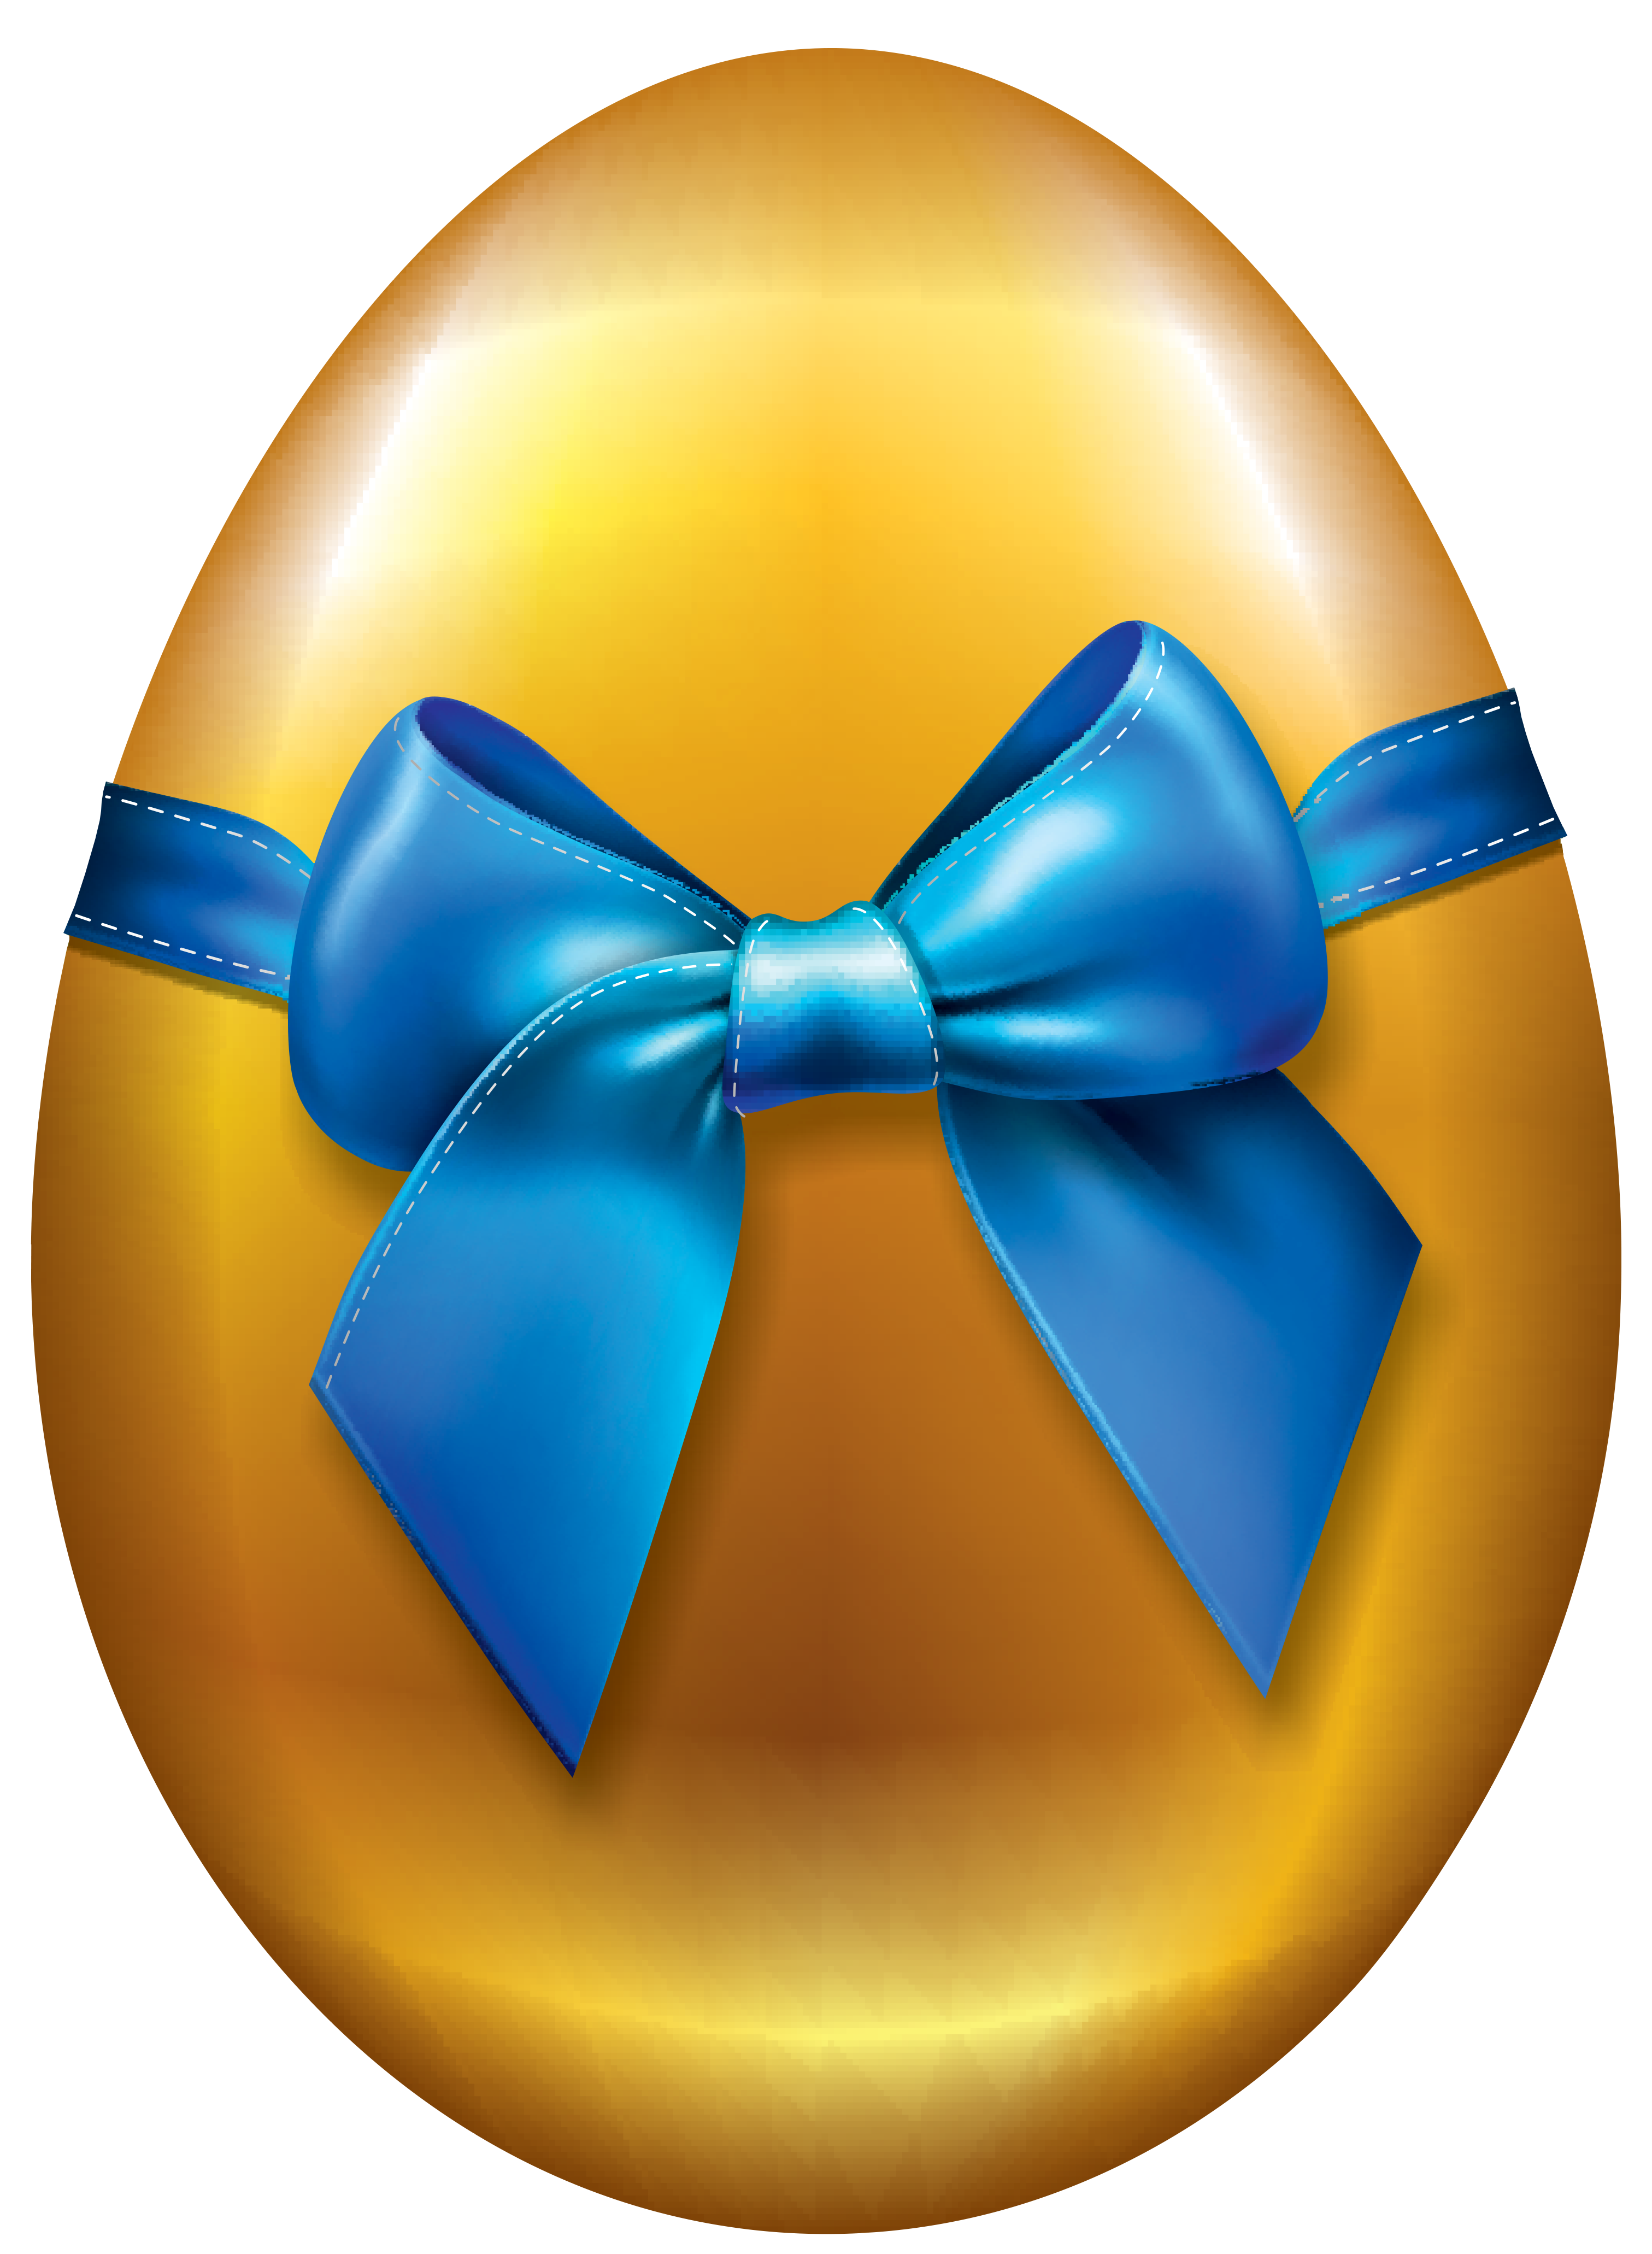 Transparent Easter Golden Egg PNG Clipart Picture Quality Image And Transparent PNG Free Clipart